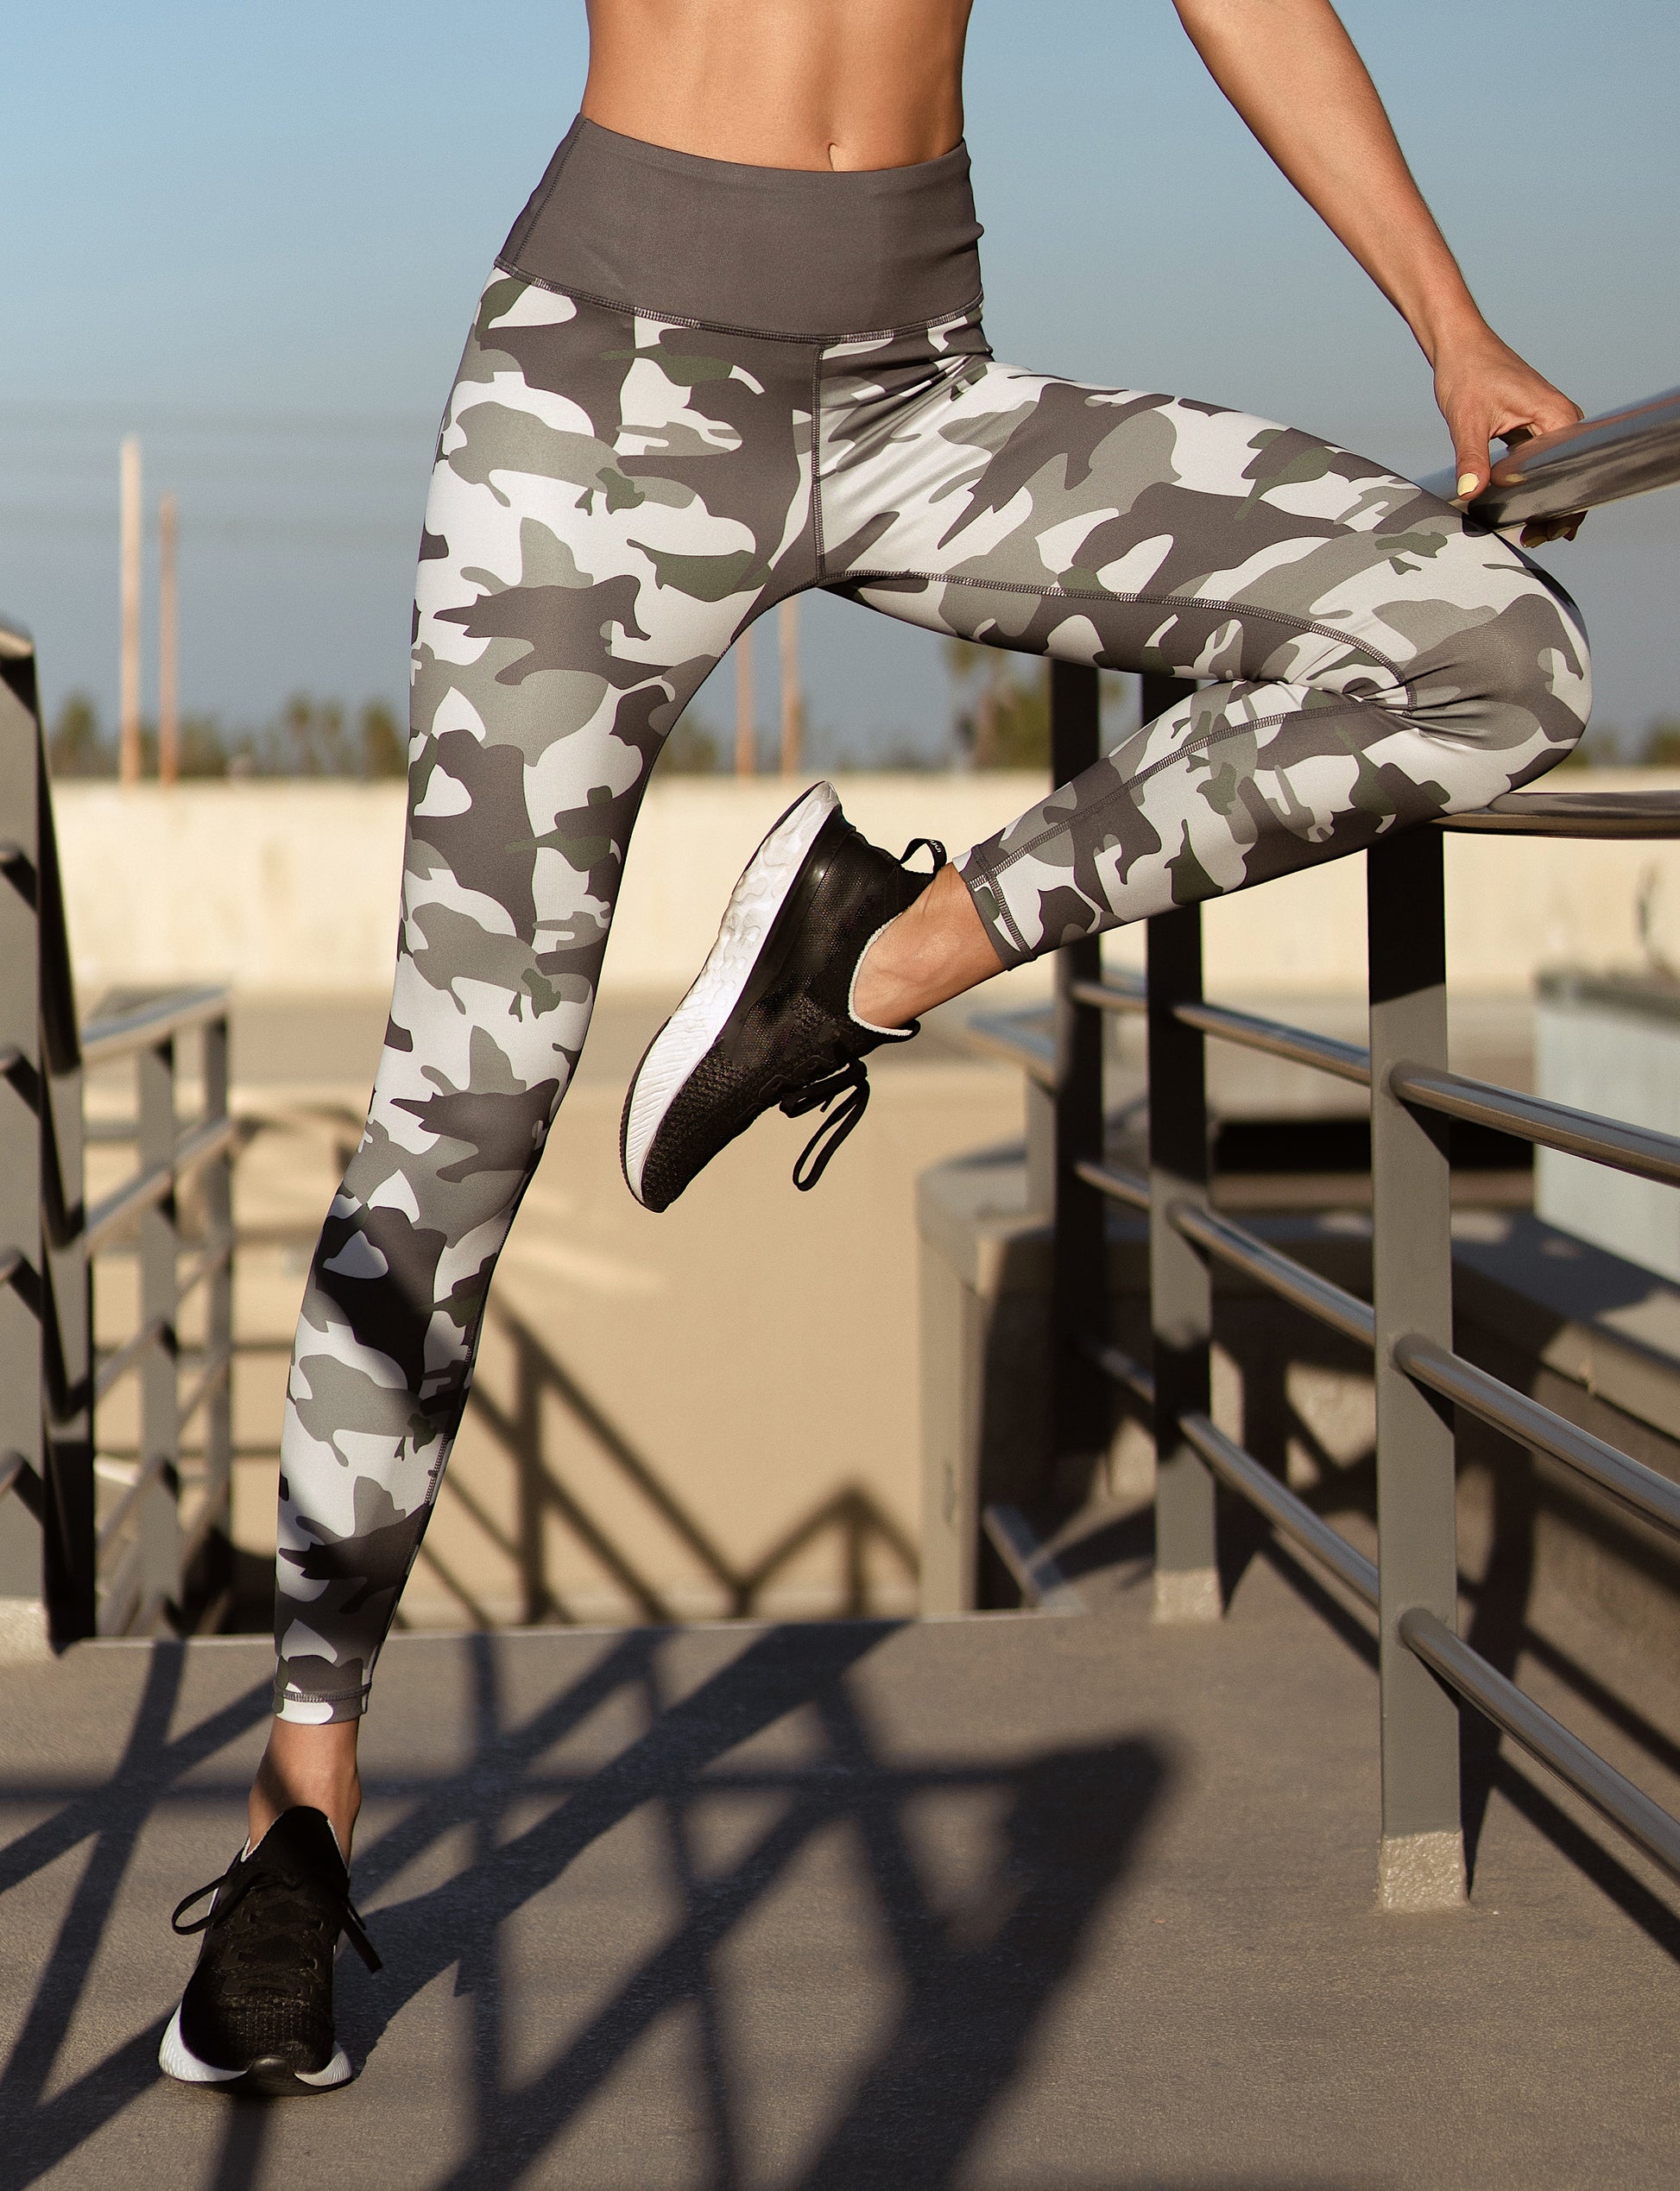 March On Camo Workout Leggings